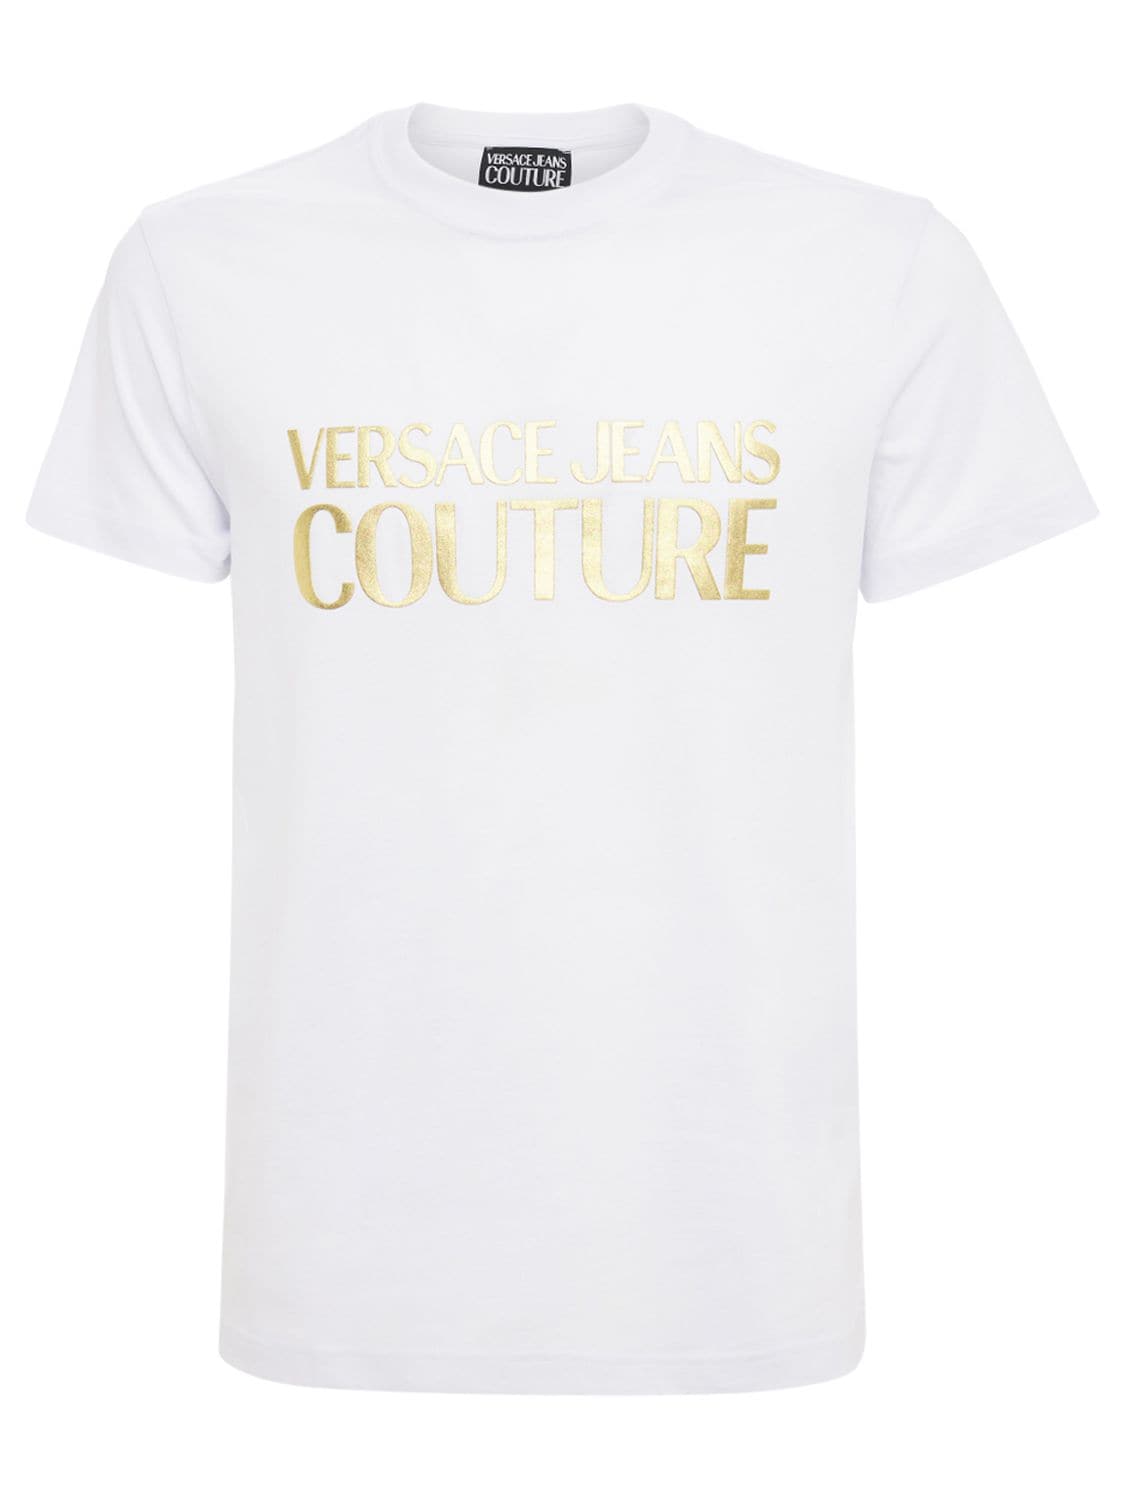 VERSACE JEANS COUTURE LOGO棉质T恤,74IBQN009-RZAZ0